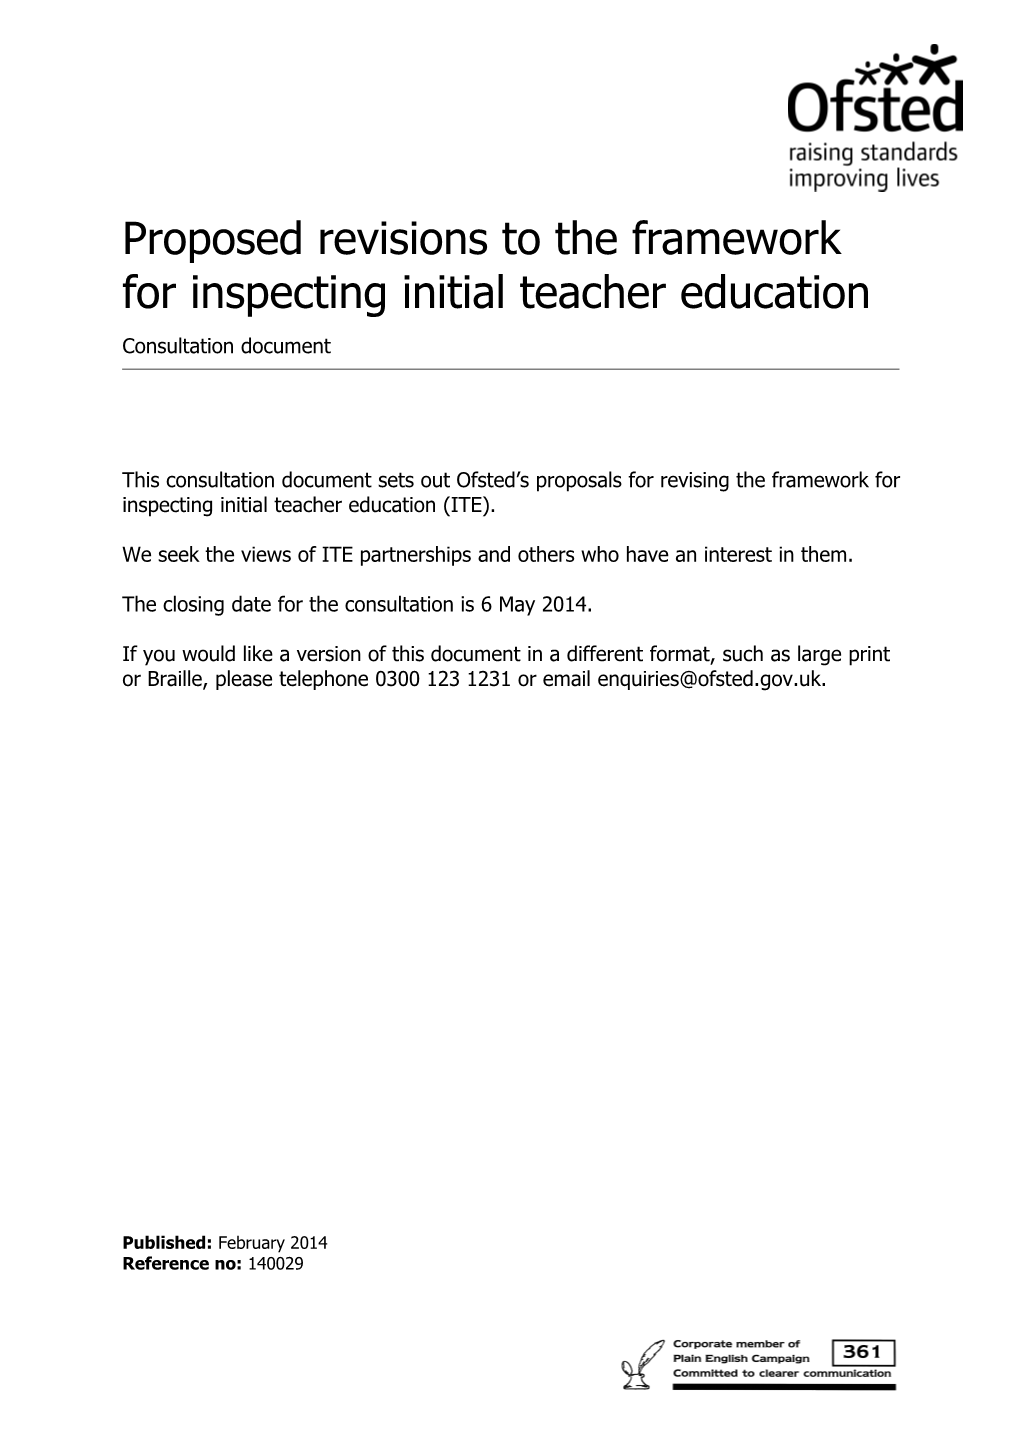 Proposed Revisions to the Framework for Inspecting Initial Teacher Education